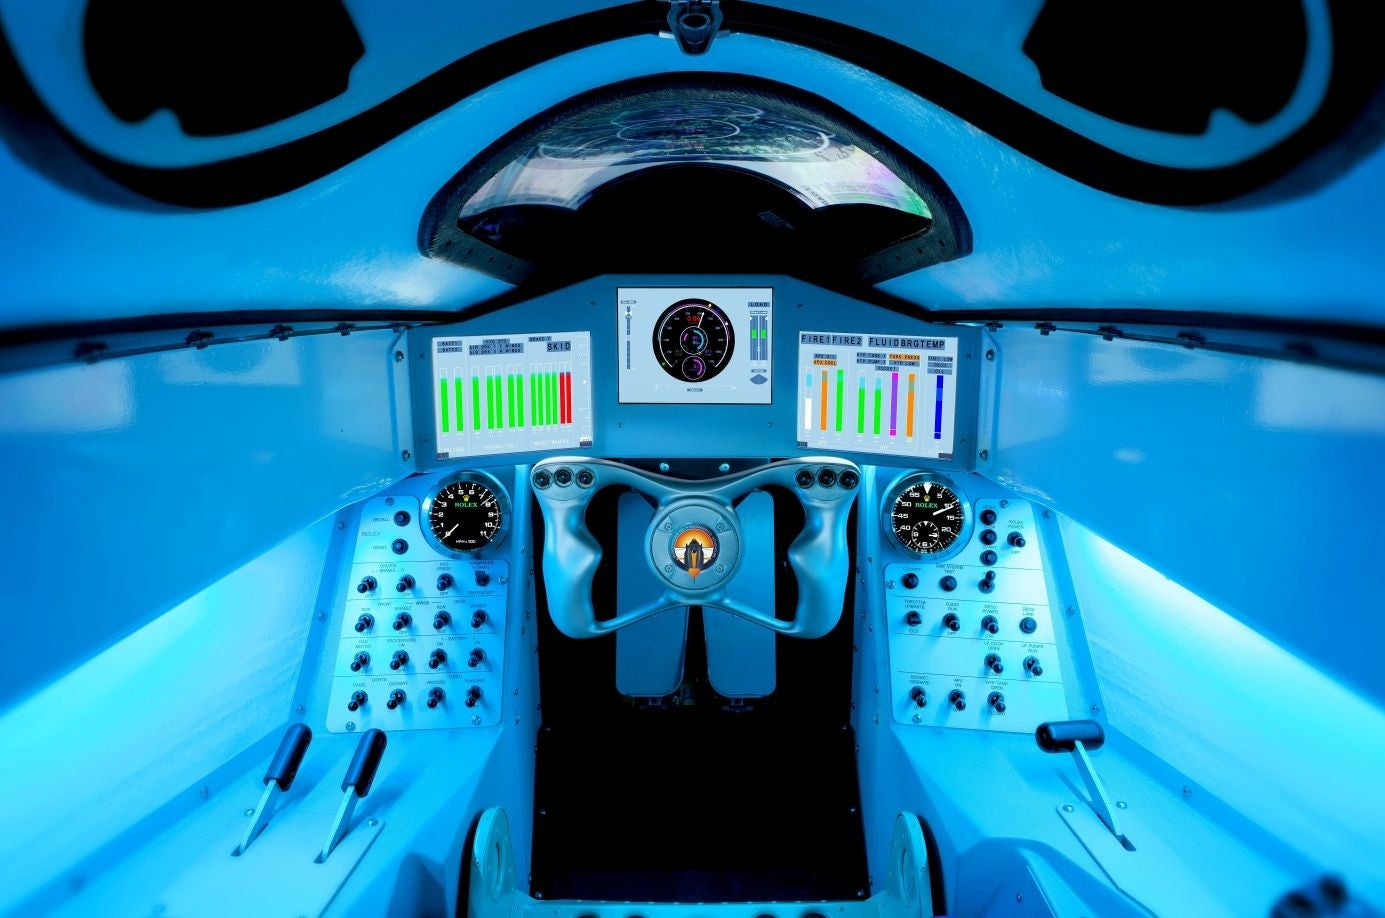 The newly-completed cockpit of the Bloodhound SSC